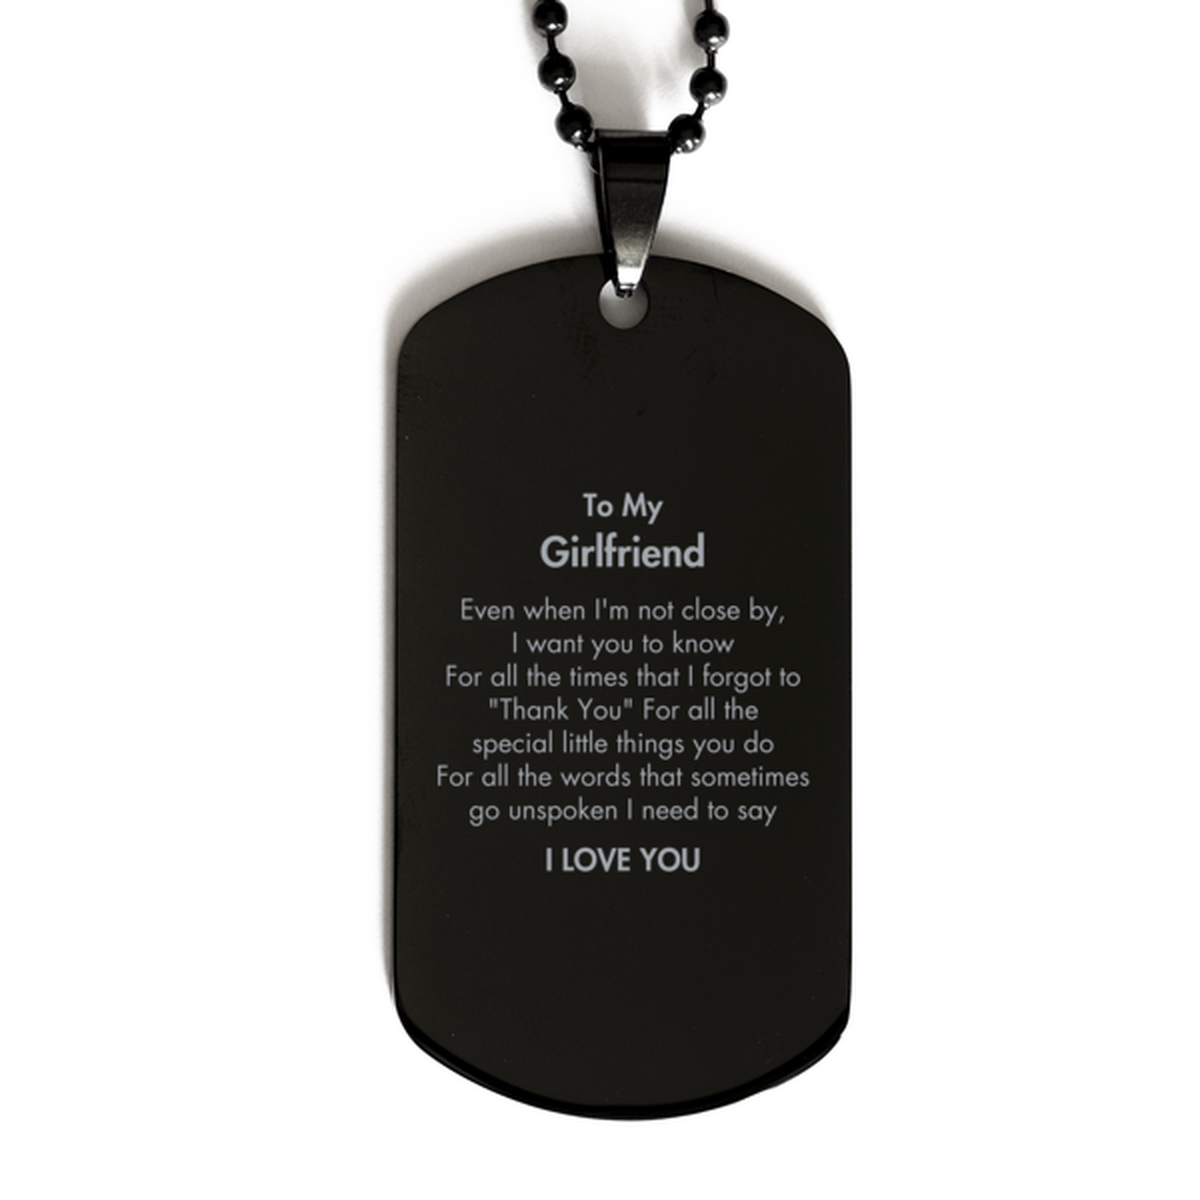 Thank You Gifts for Girlfriend, Keepsake Black Dog Tag Gifts for Girlfriend Birthday Mother's day Father's Day Girlfriend For all the words That sometimes go unspoken I need to say I LOVE YOU